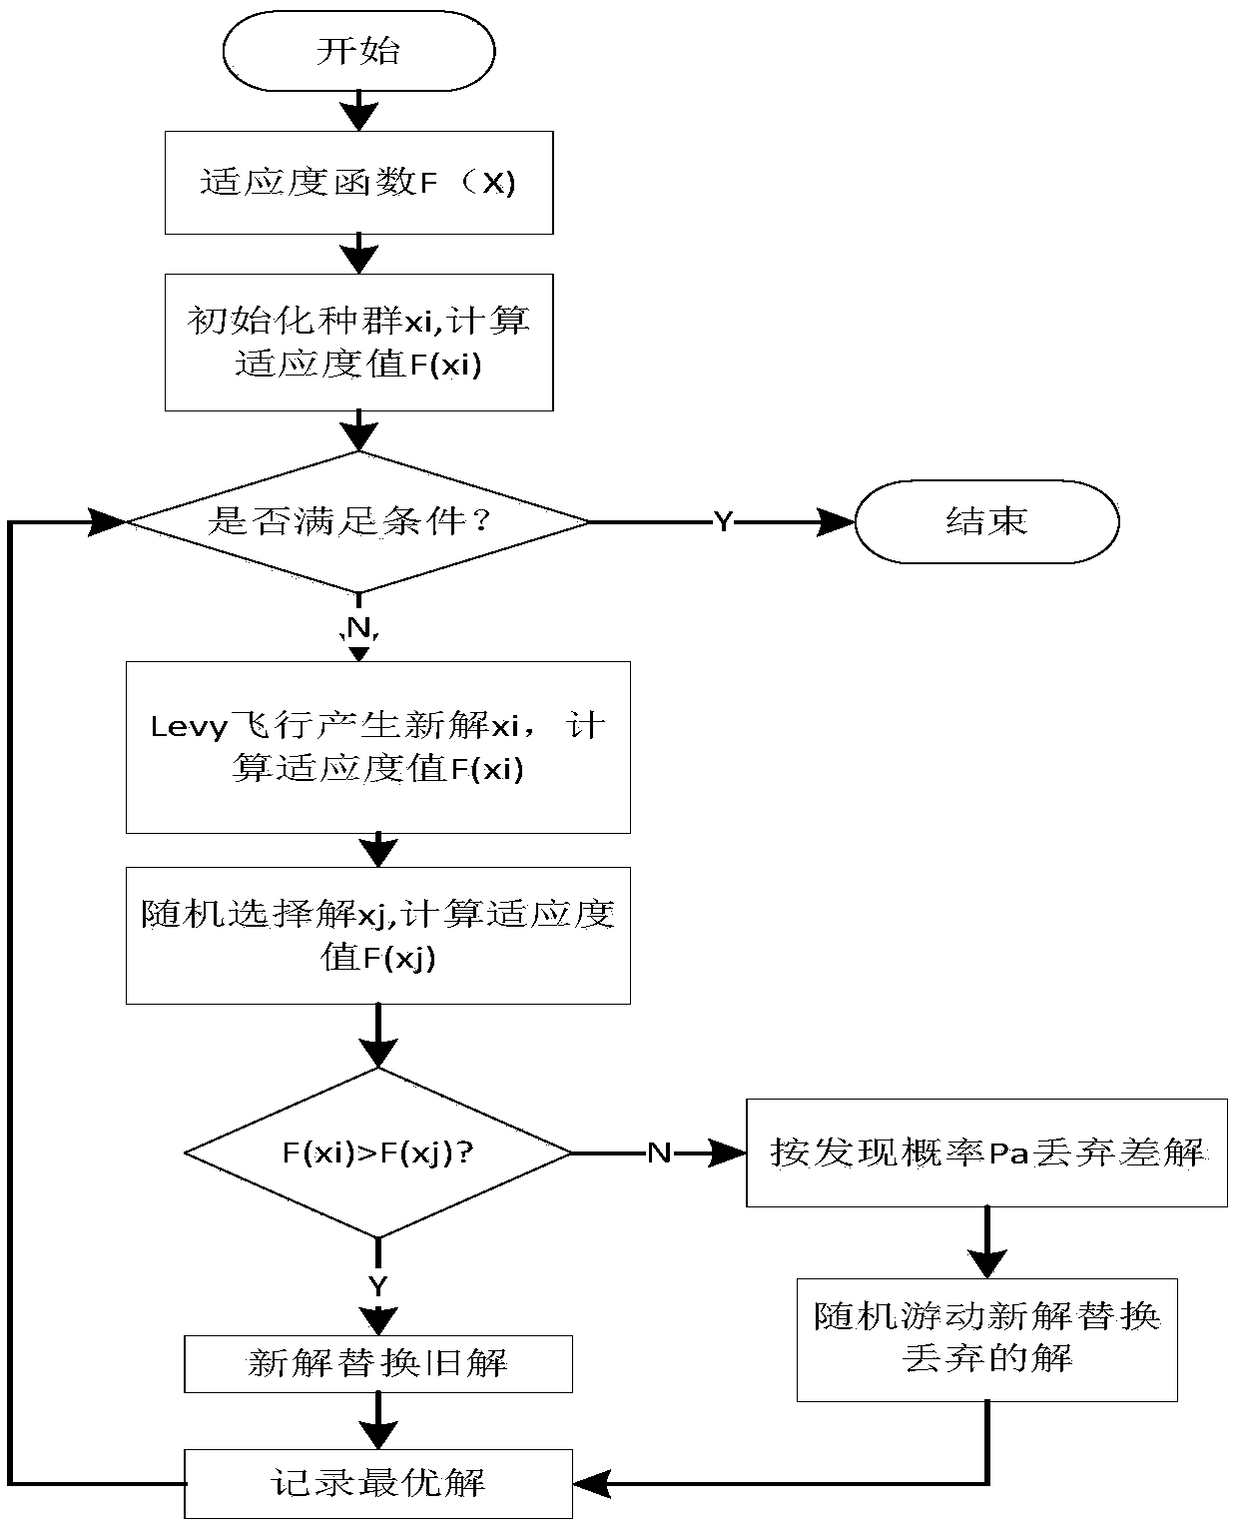 A logistics distribution route planning method with a time window based on a cuckoo algorithm